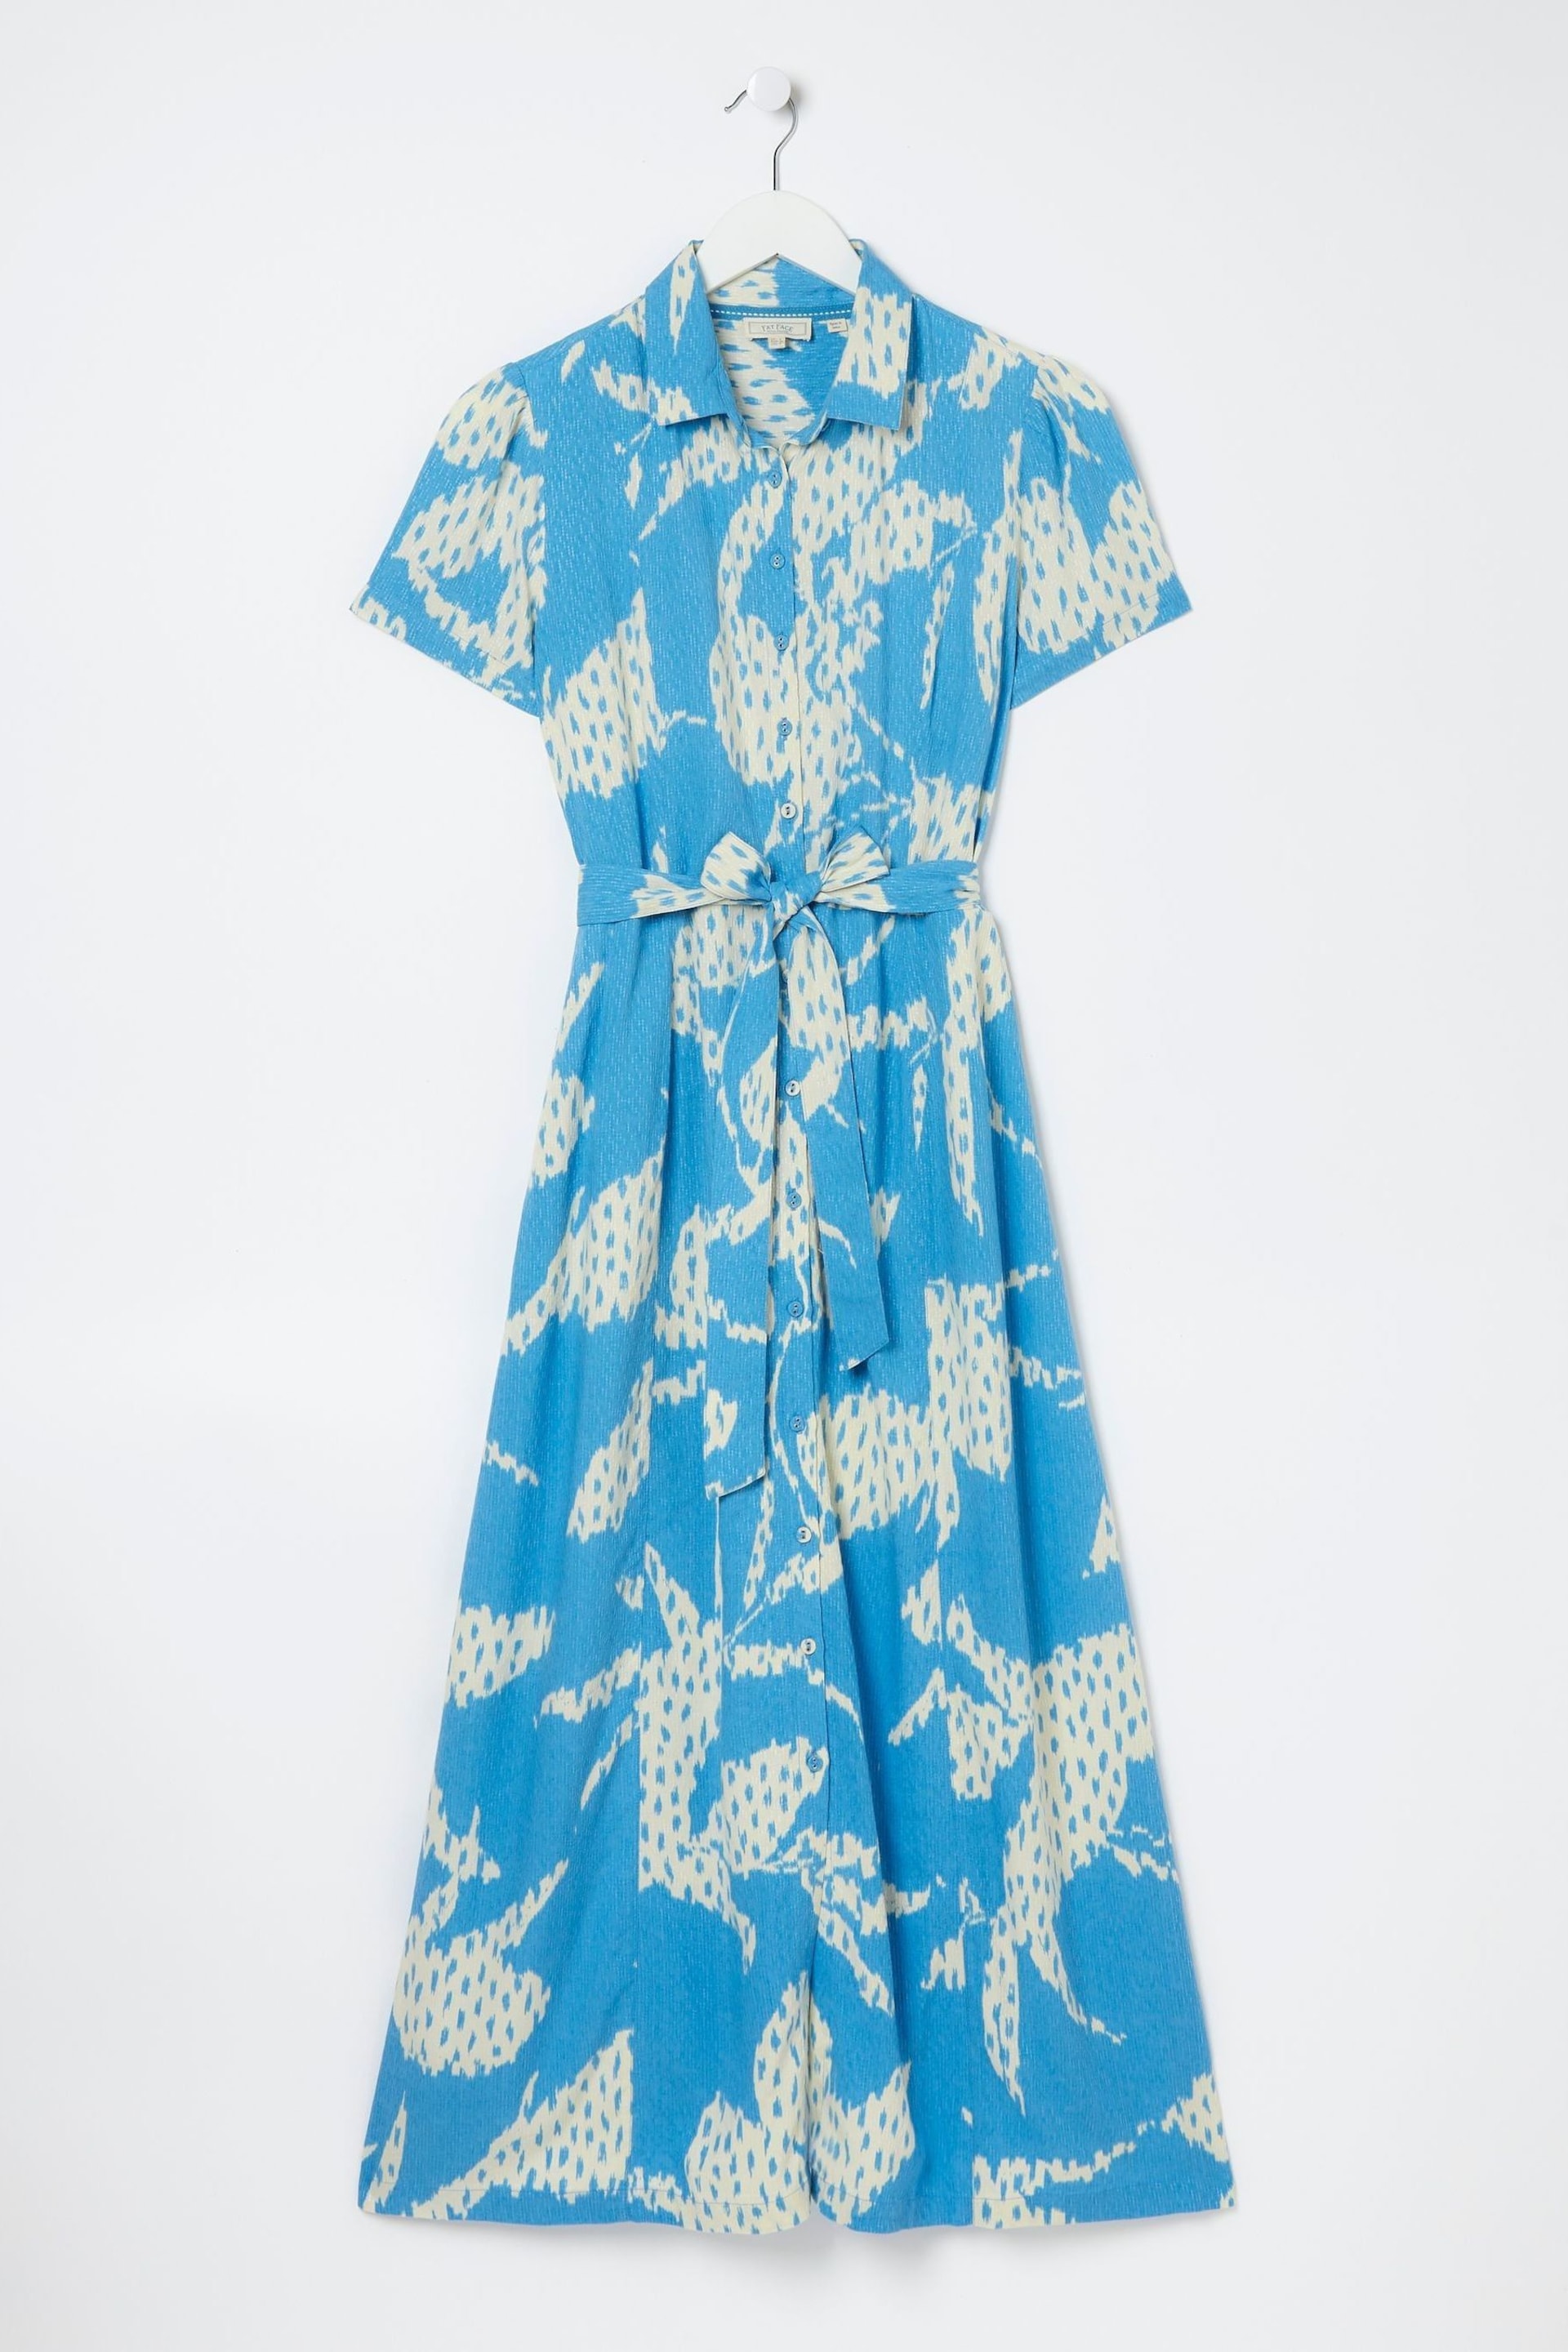 FatFace Blue Aster Textured Leaves Midi Dress - Image 7 of 7